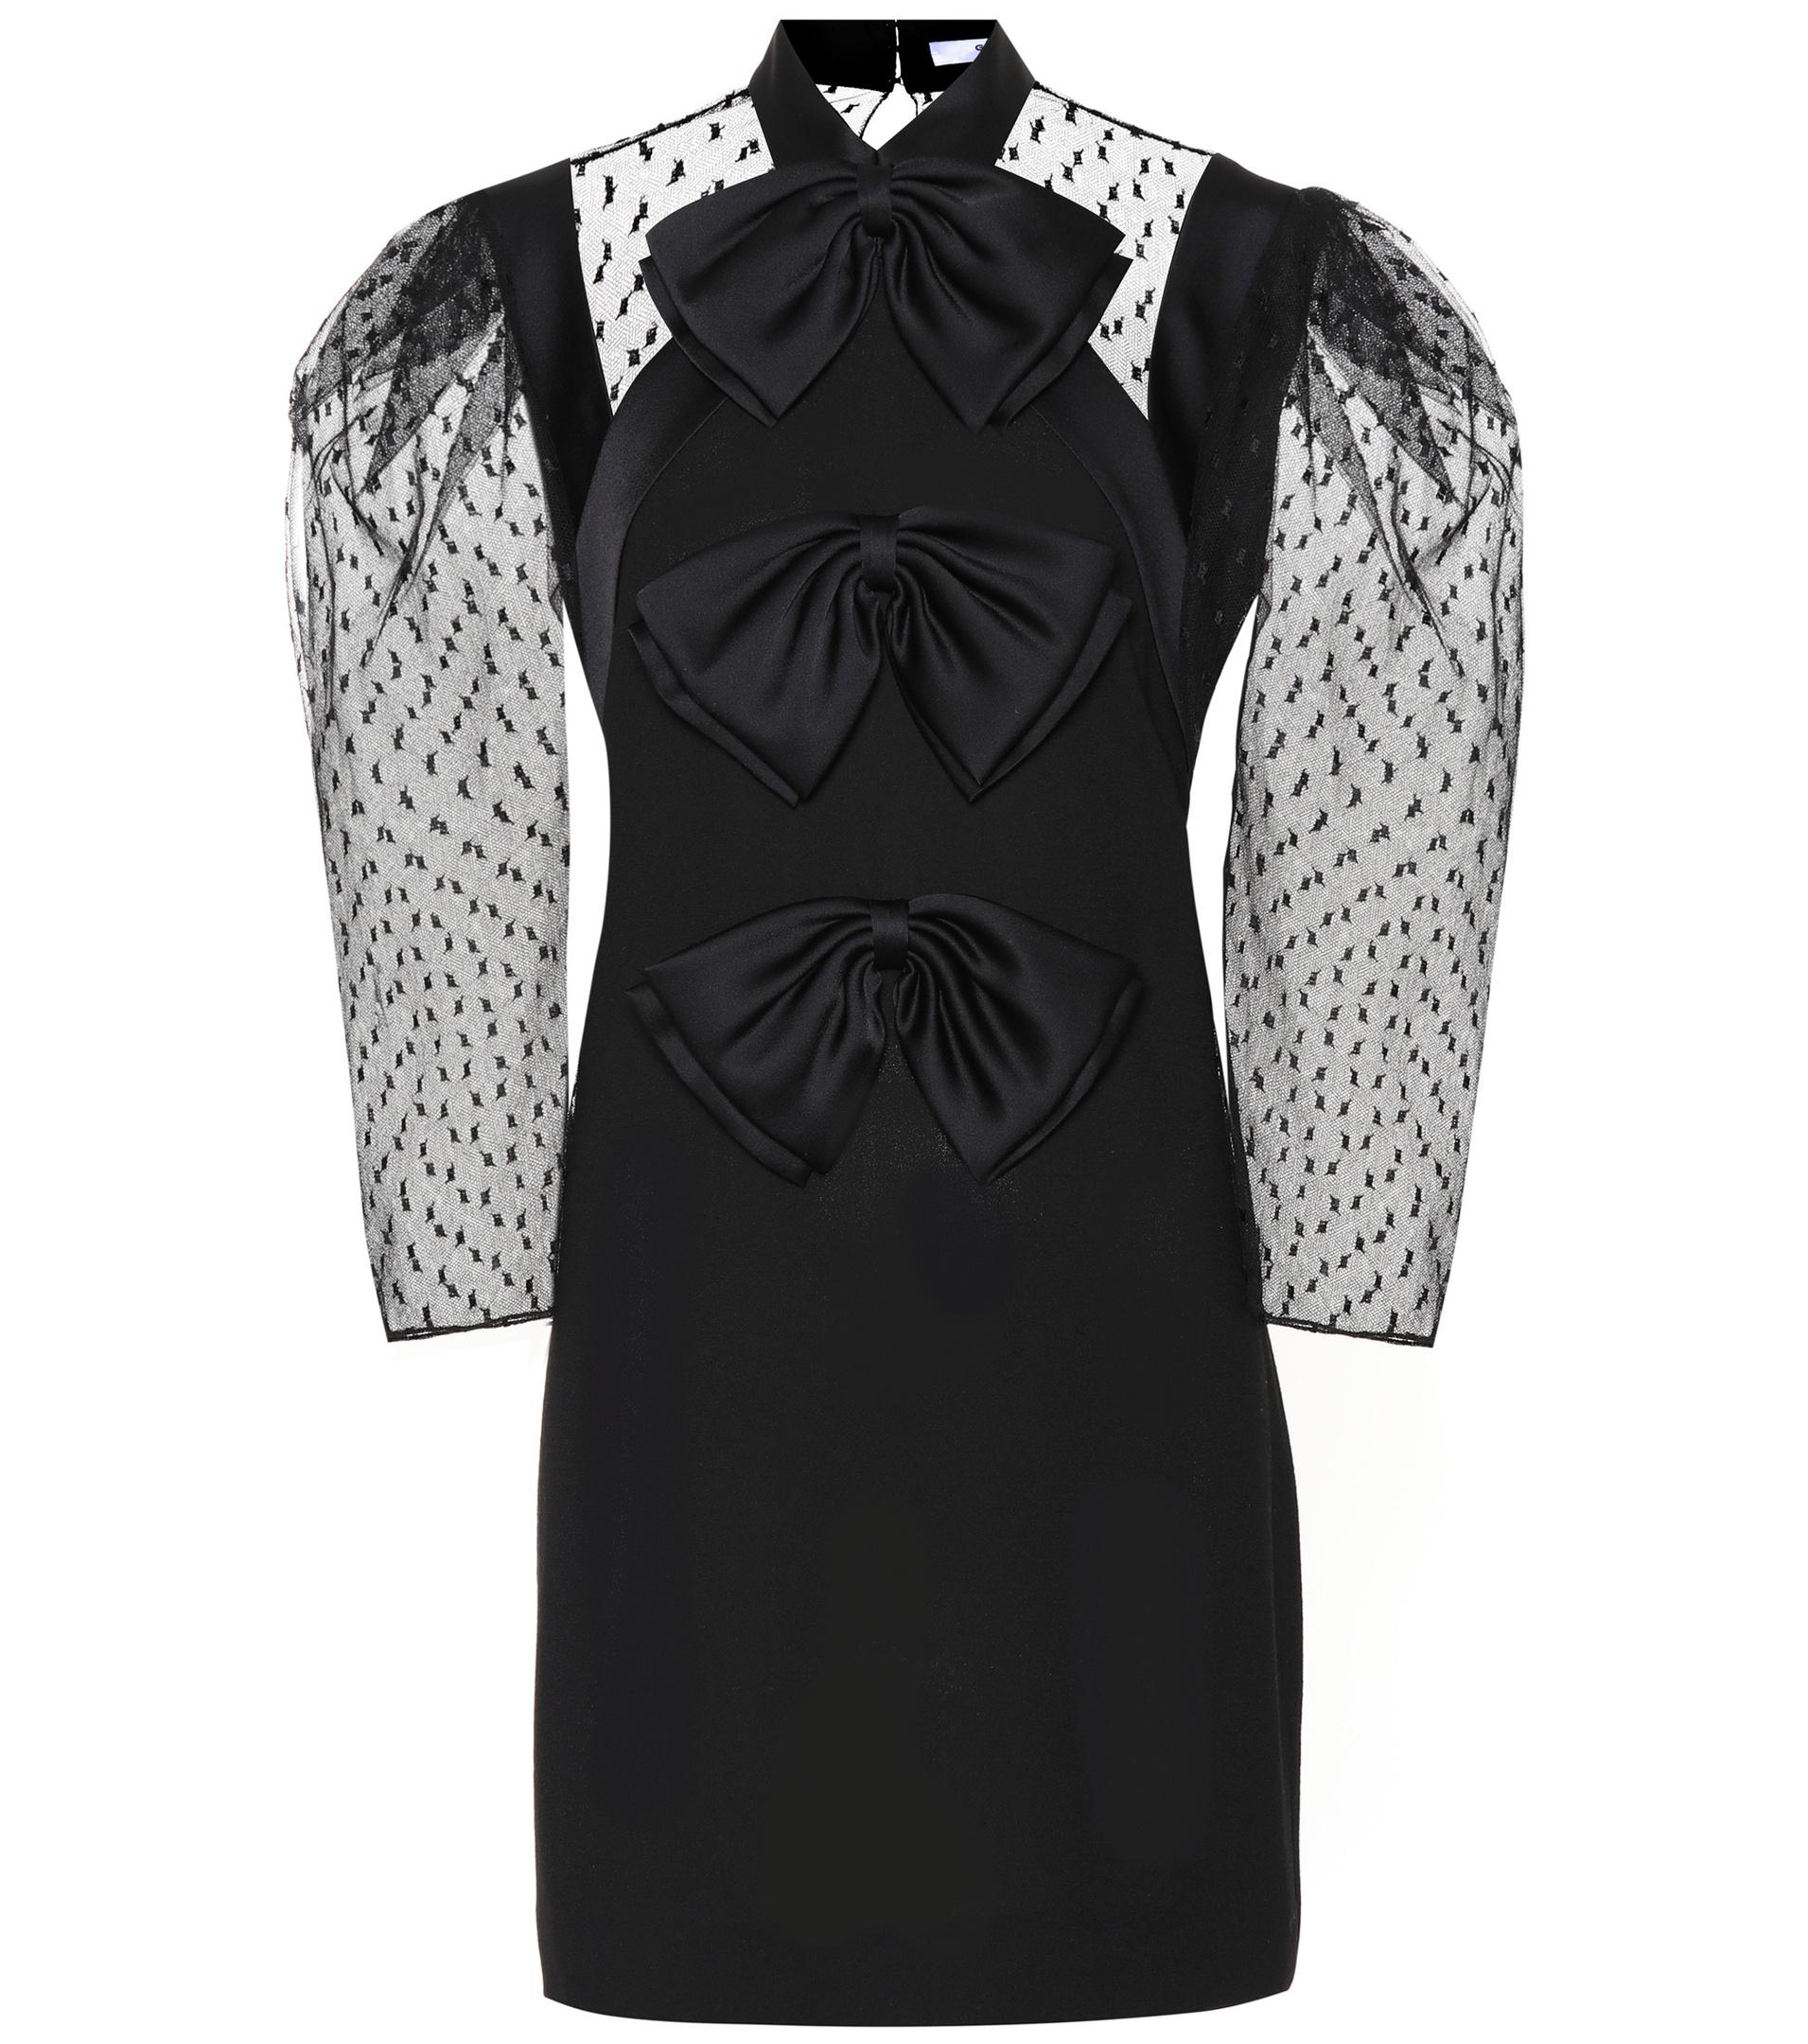 Givenchy Wool Dress in Black - Save 27% - Lyst